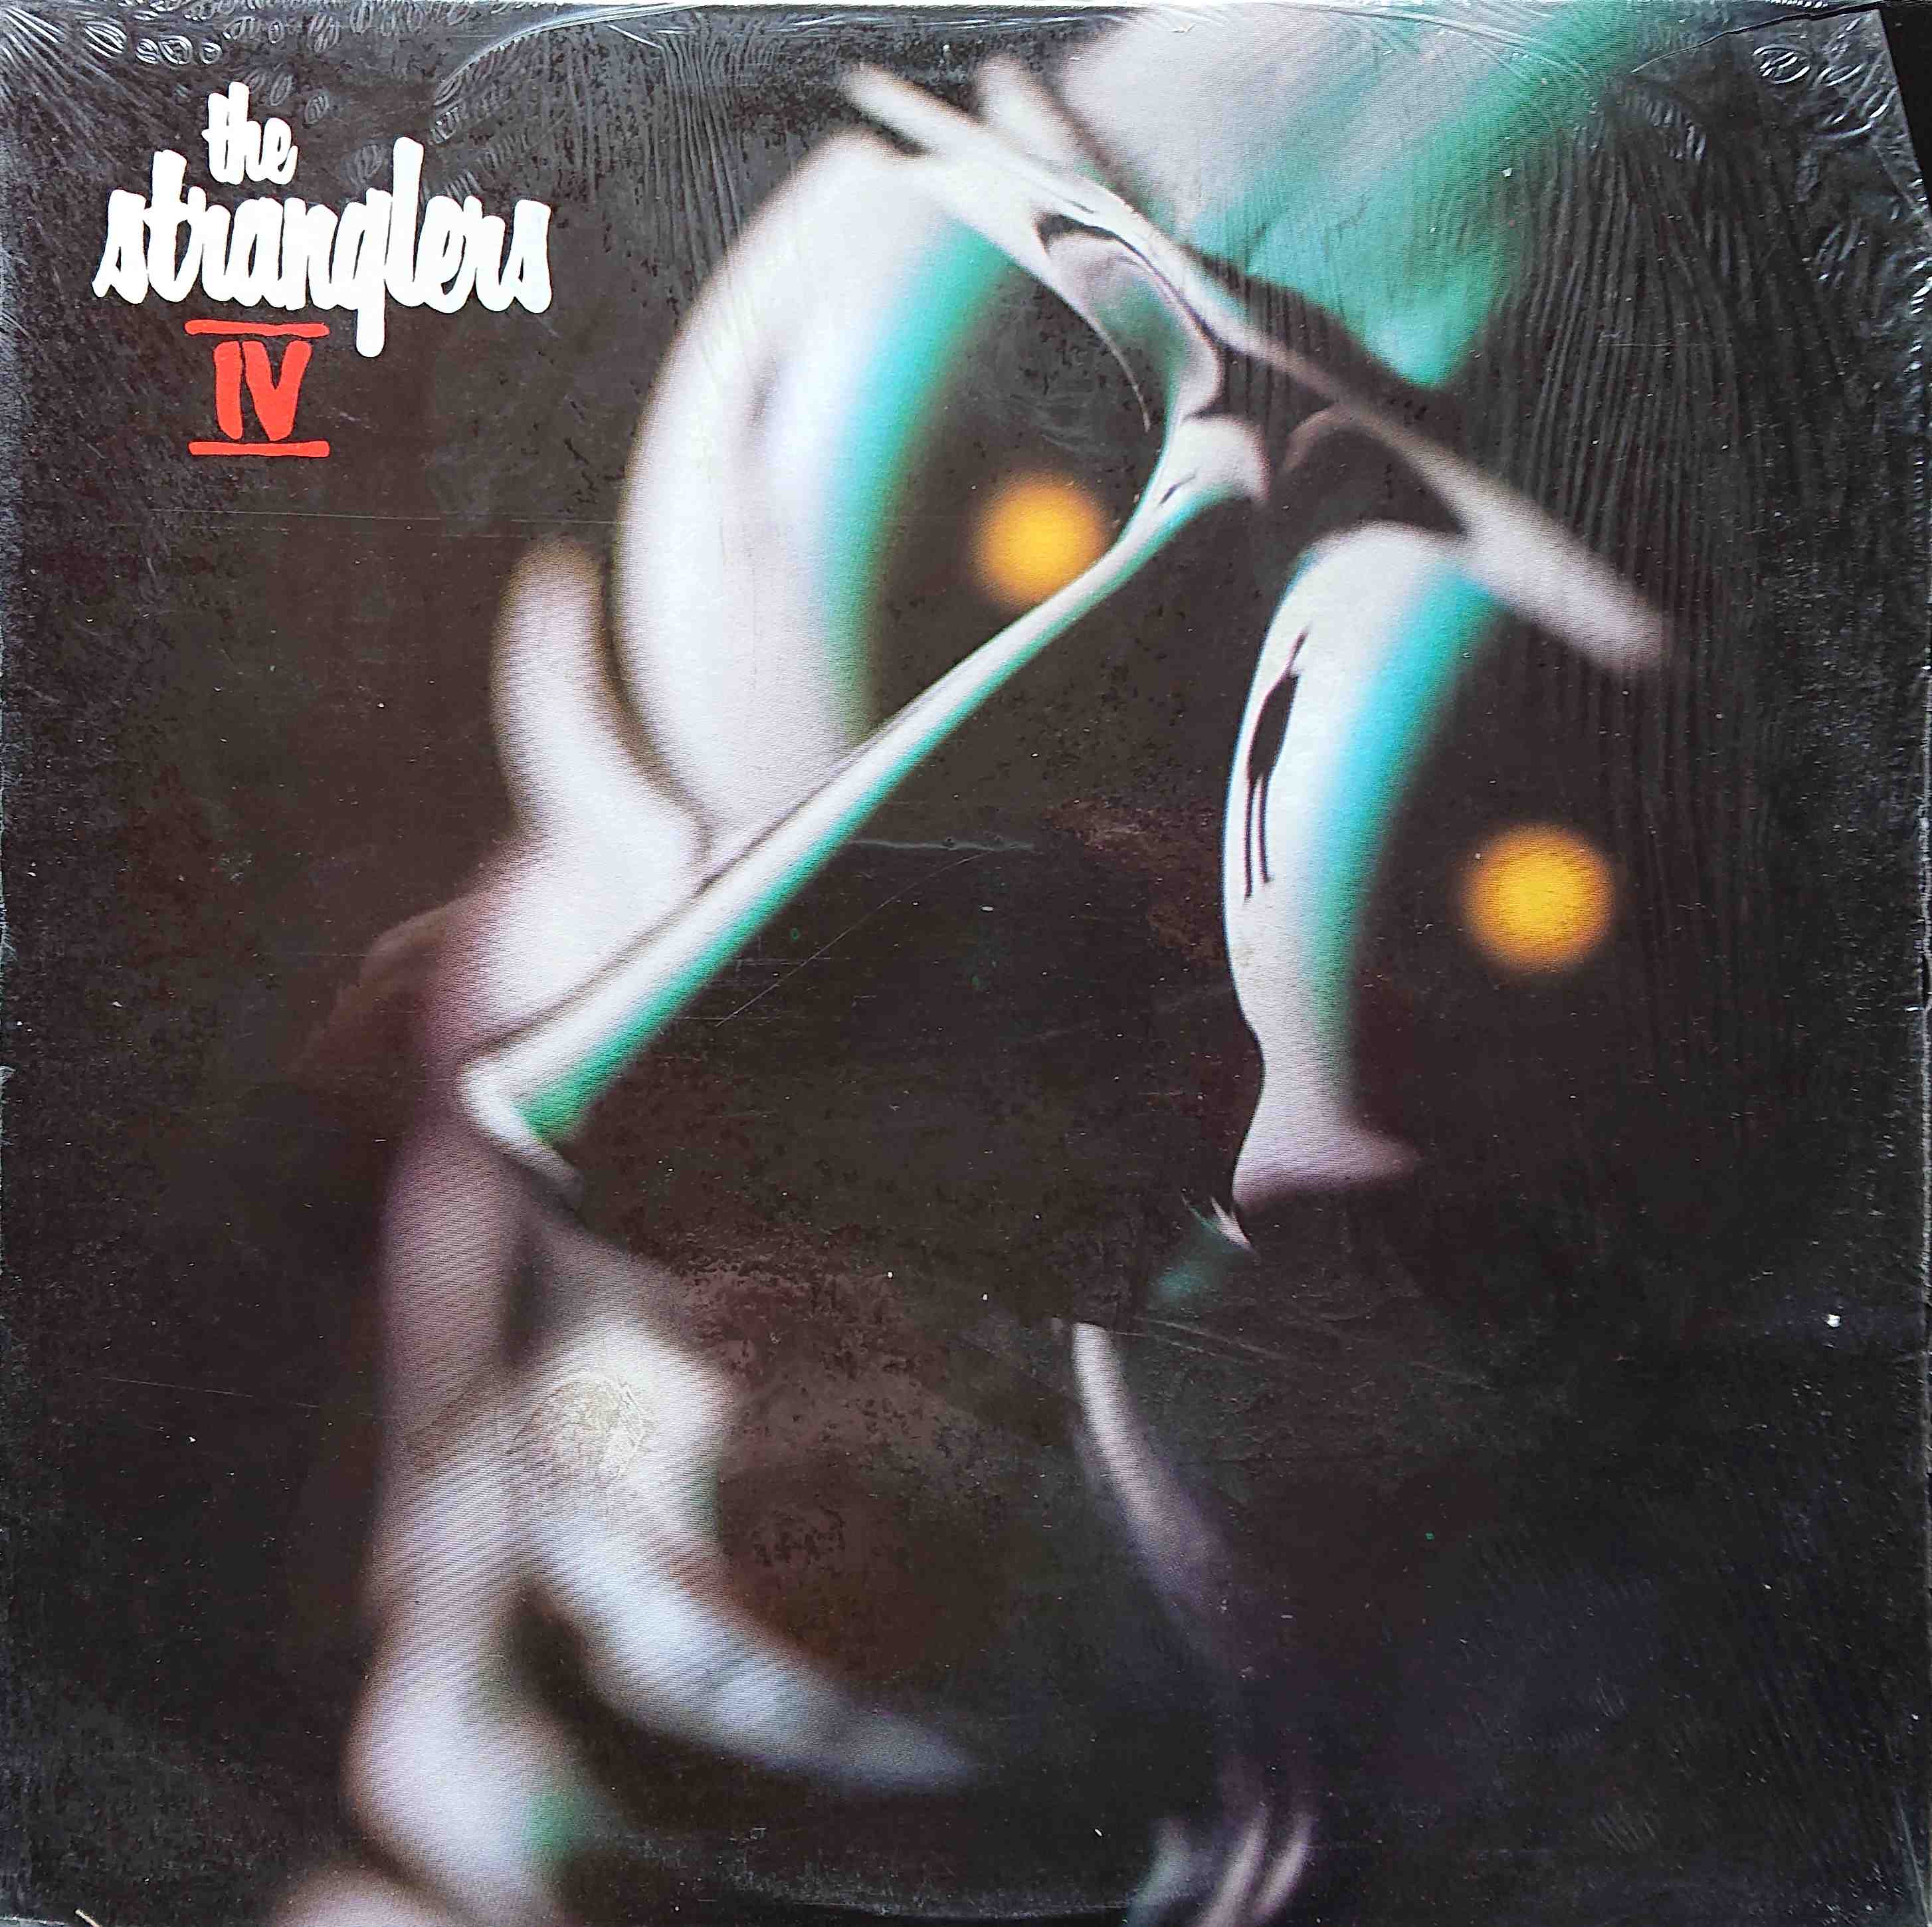 Picture of IV by artist The Stranglers from The Stranglers albums